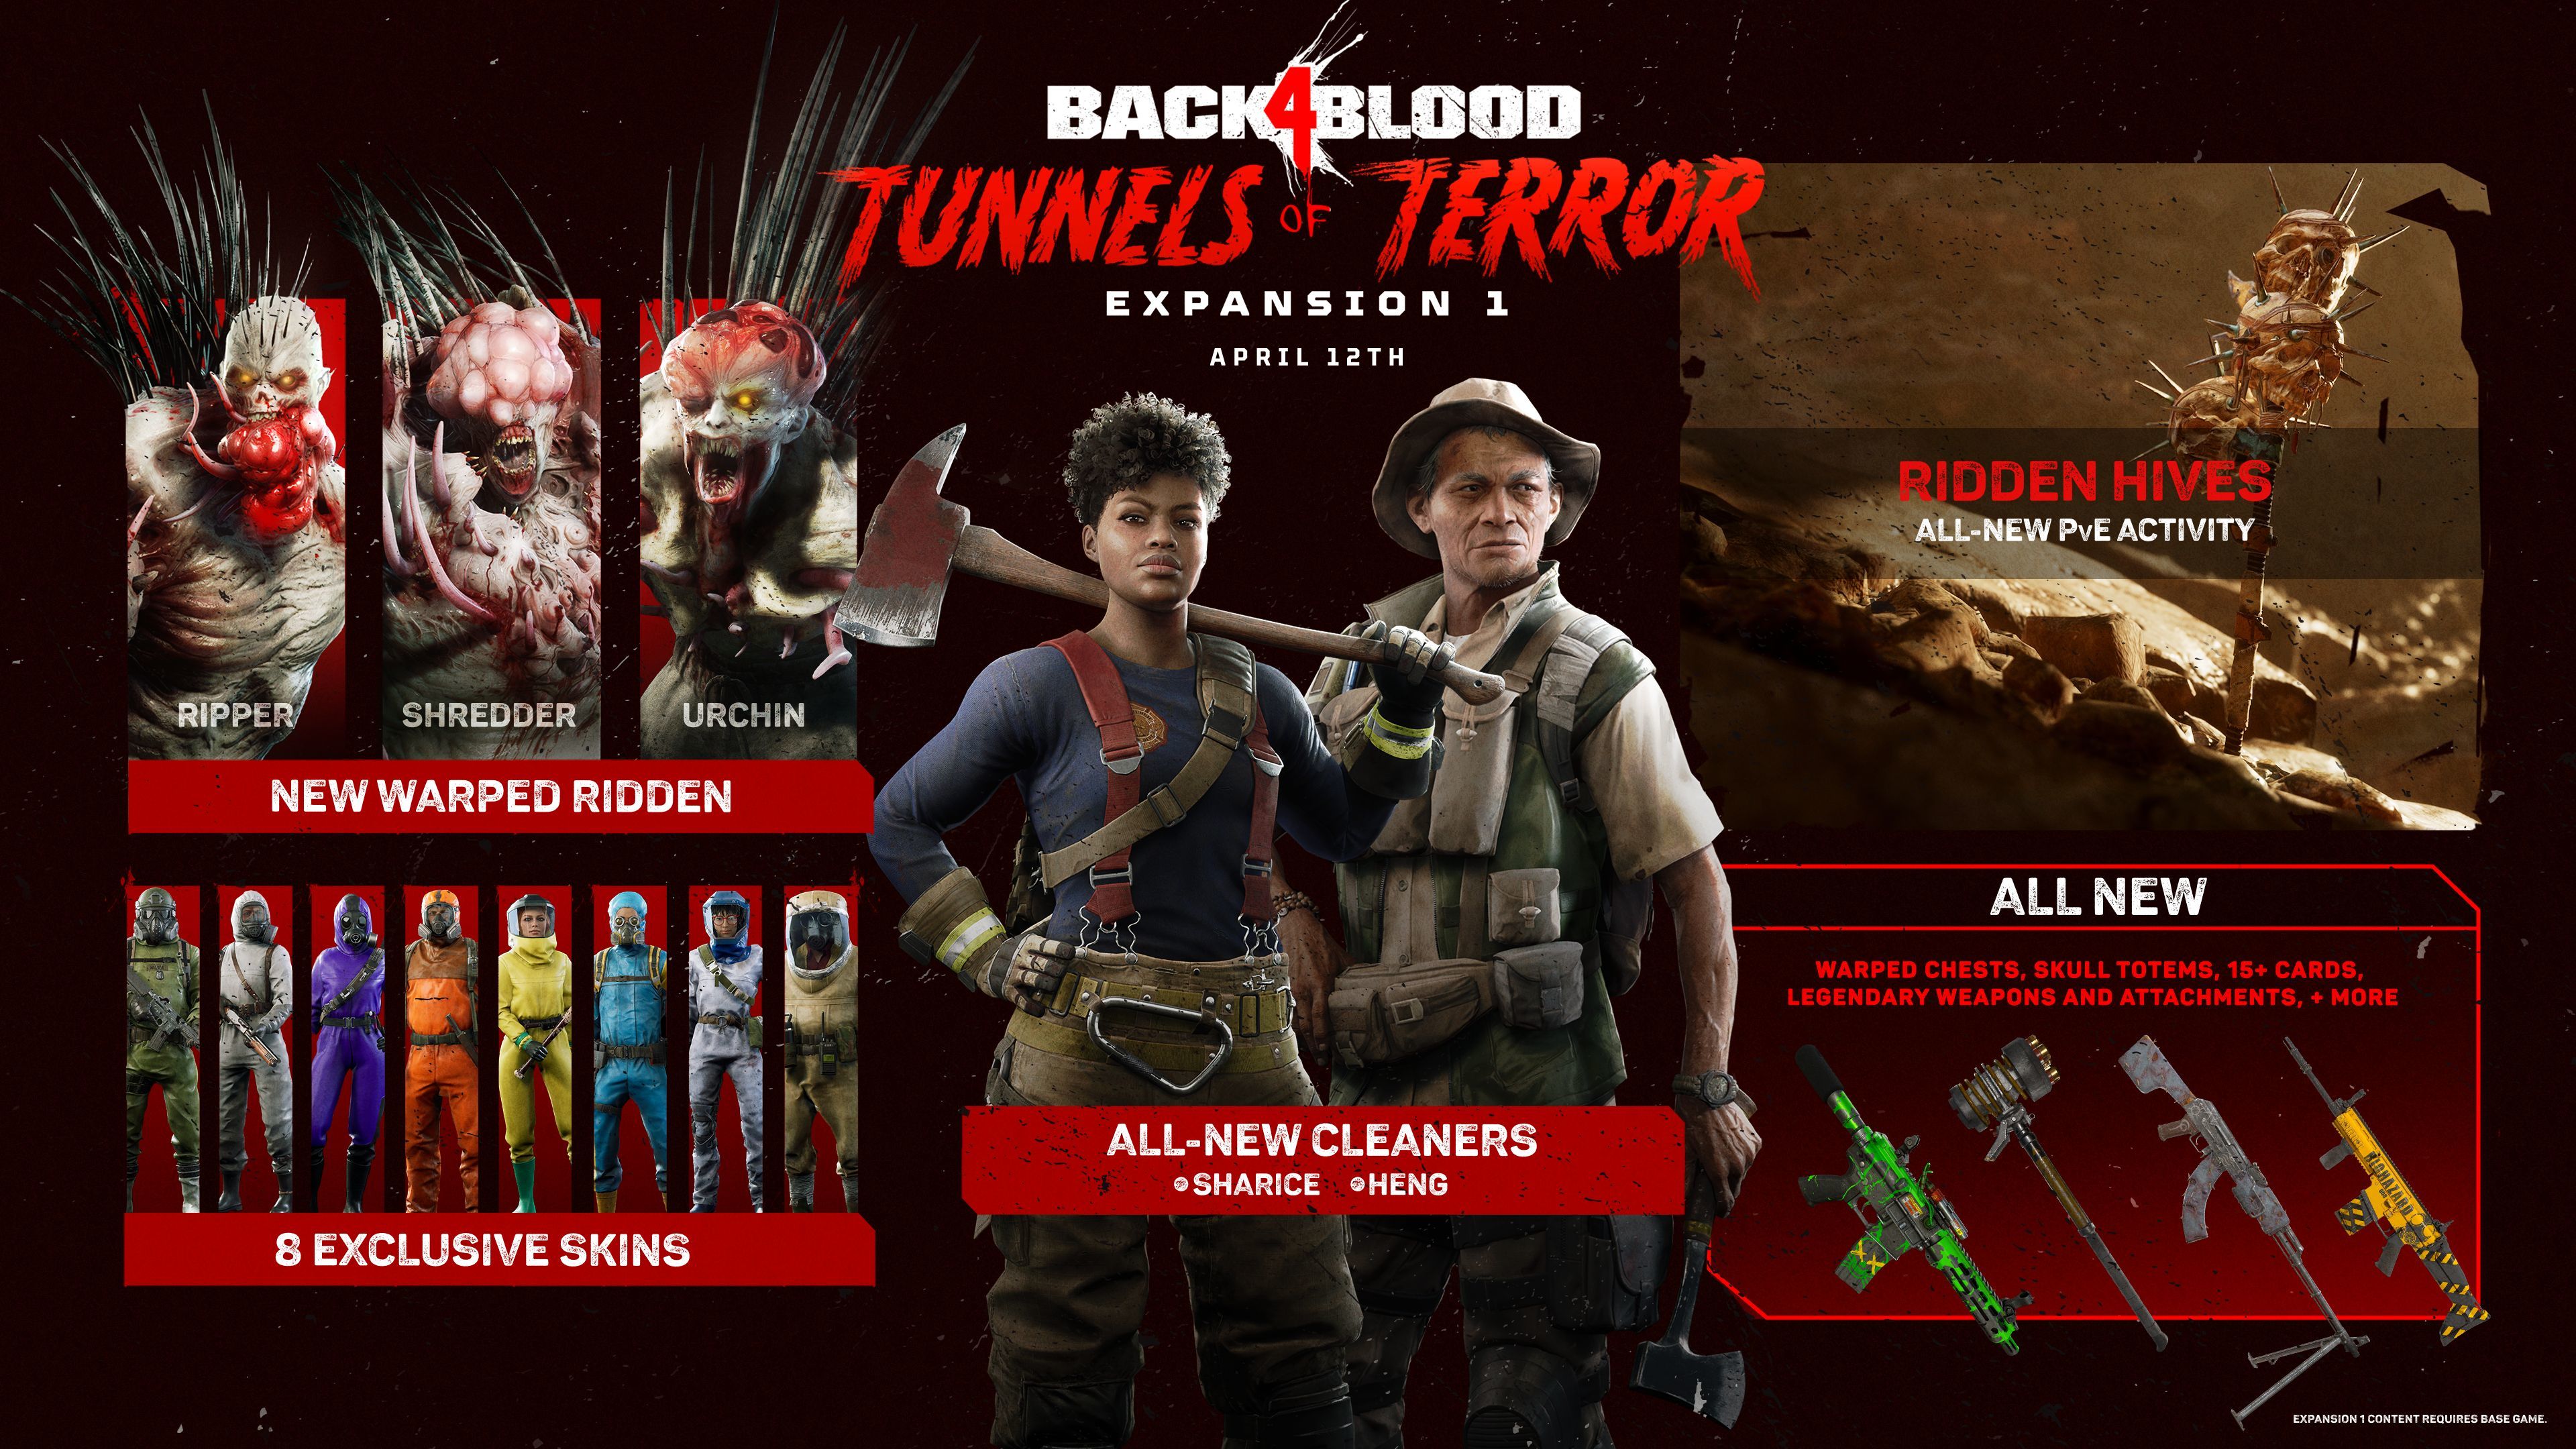 Back 4 Blood has more than 10 million players and new content is